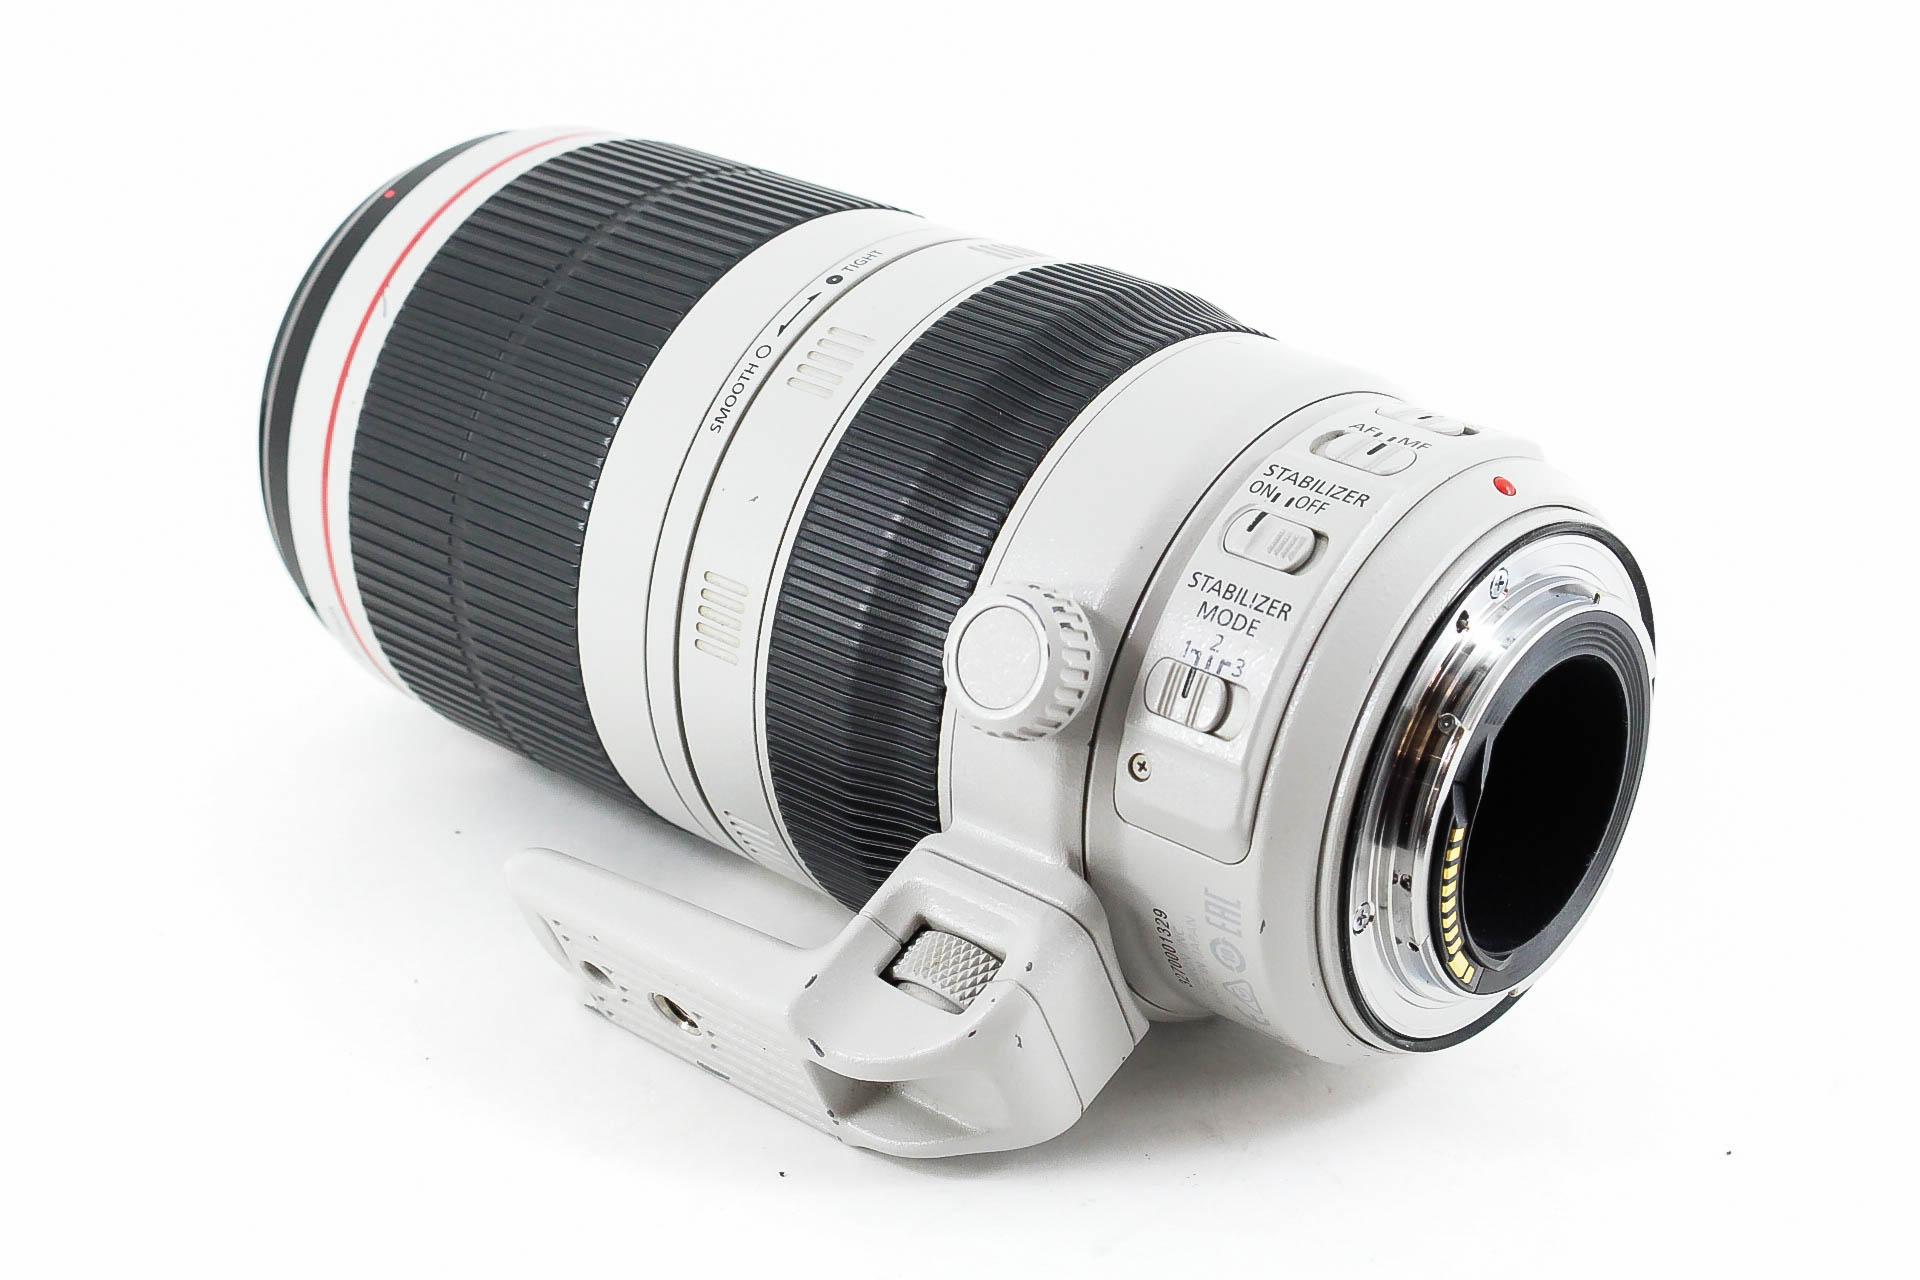 Canon EF 100-400mm F4.5-5.6 L IS II USM Lens Lenses and Cameras